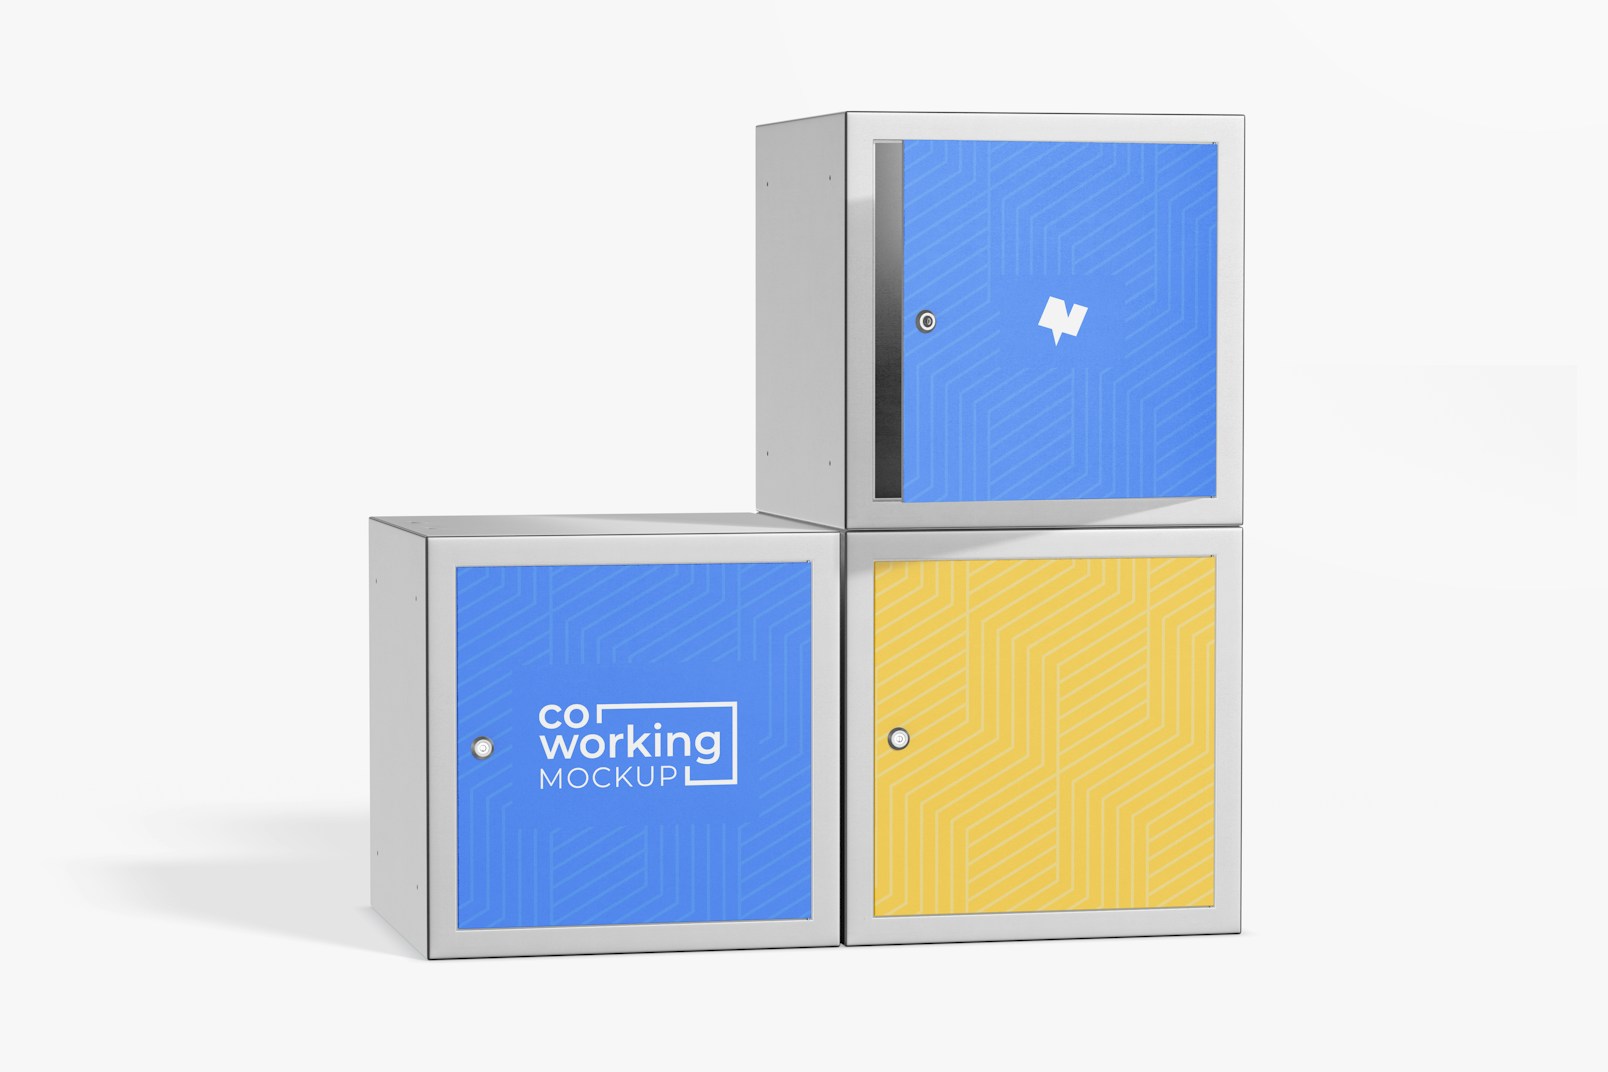 Square Box Lockers Mockup, Opened and Closed